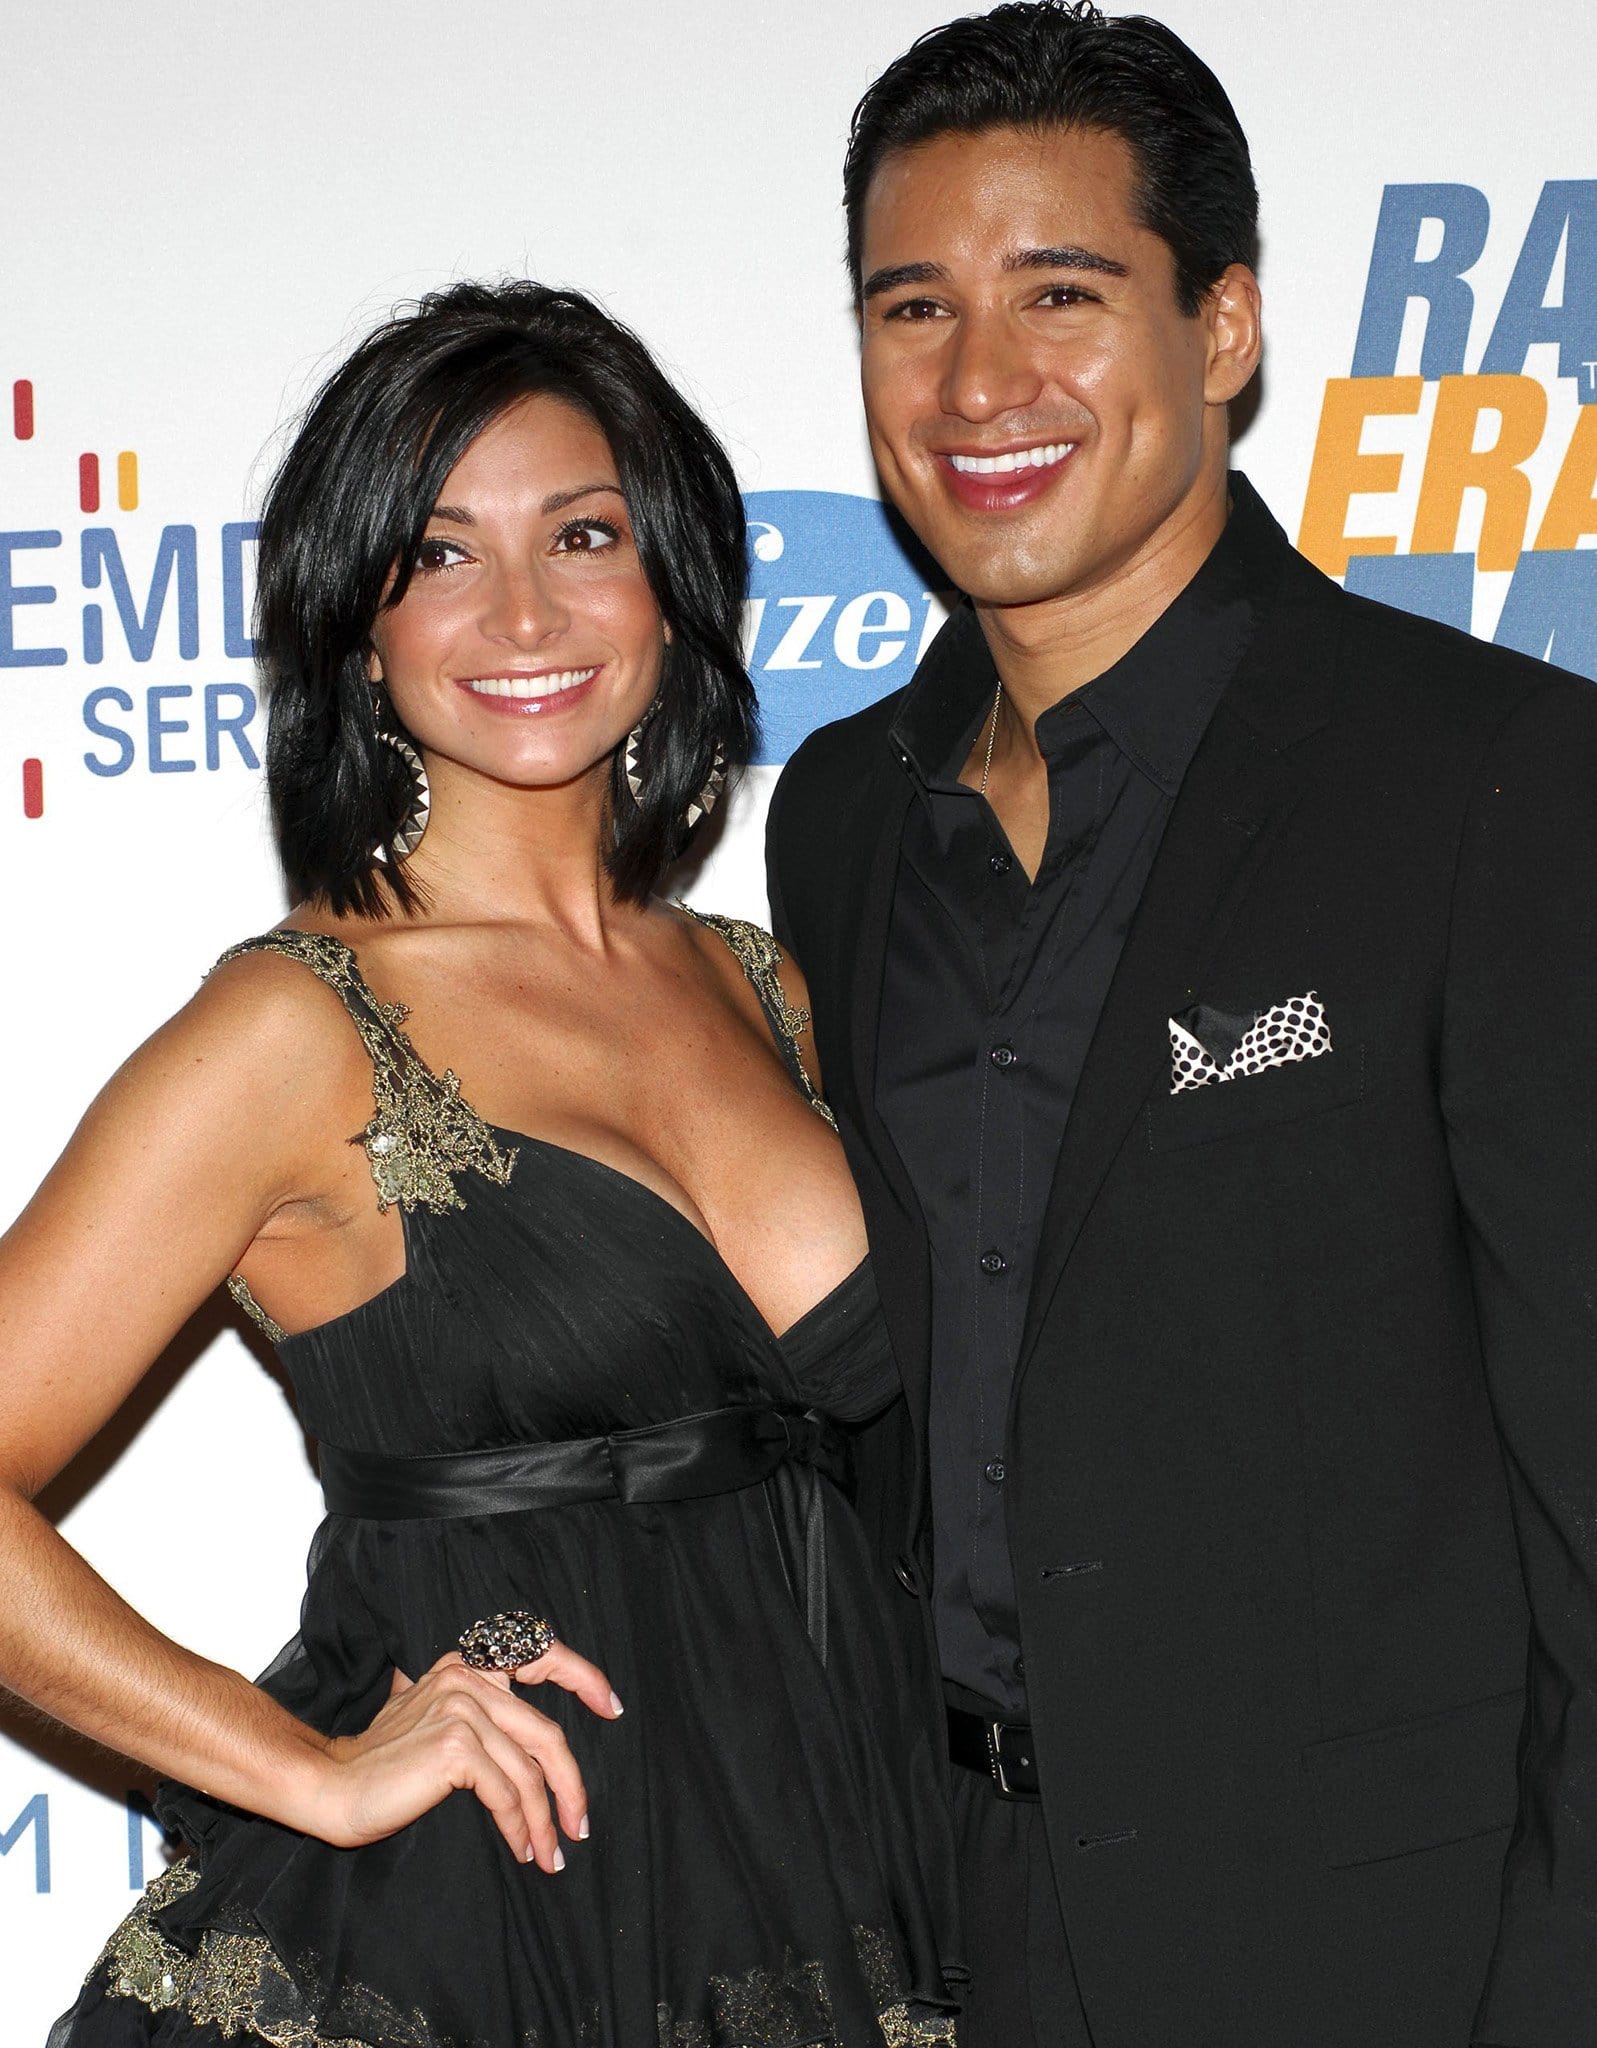 Mario Lopez first thought Courtney Laine Mazza was cute and later realized she was talented at singing and dancing